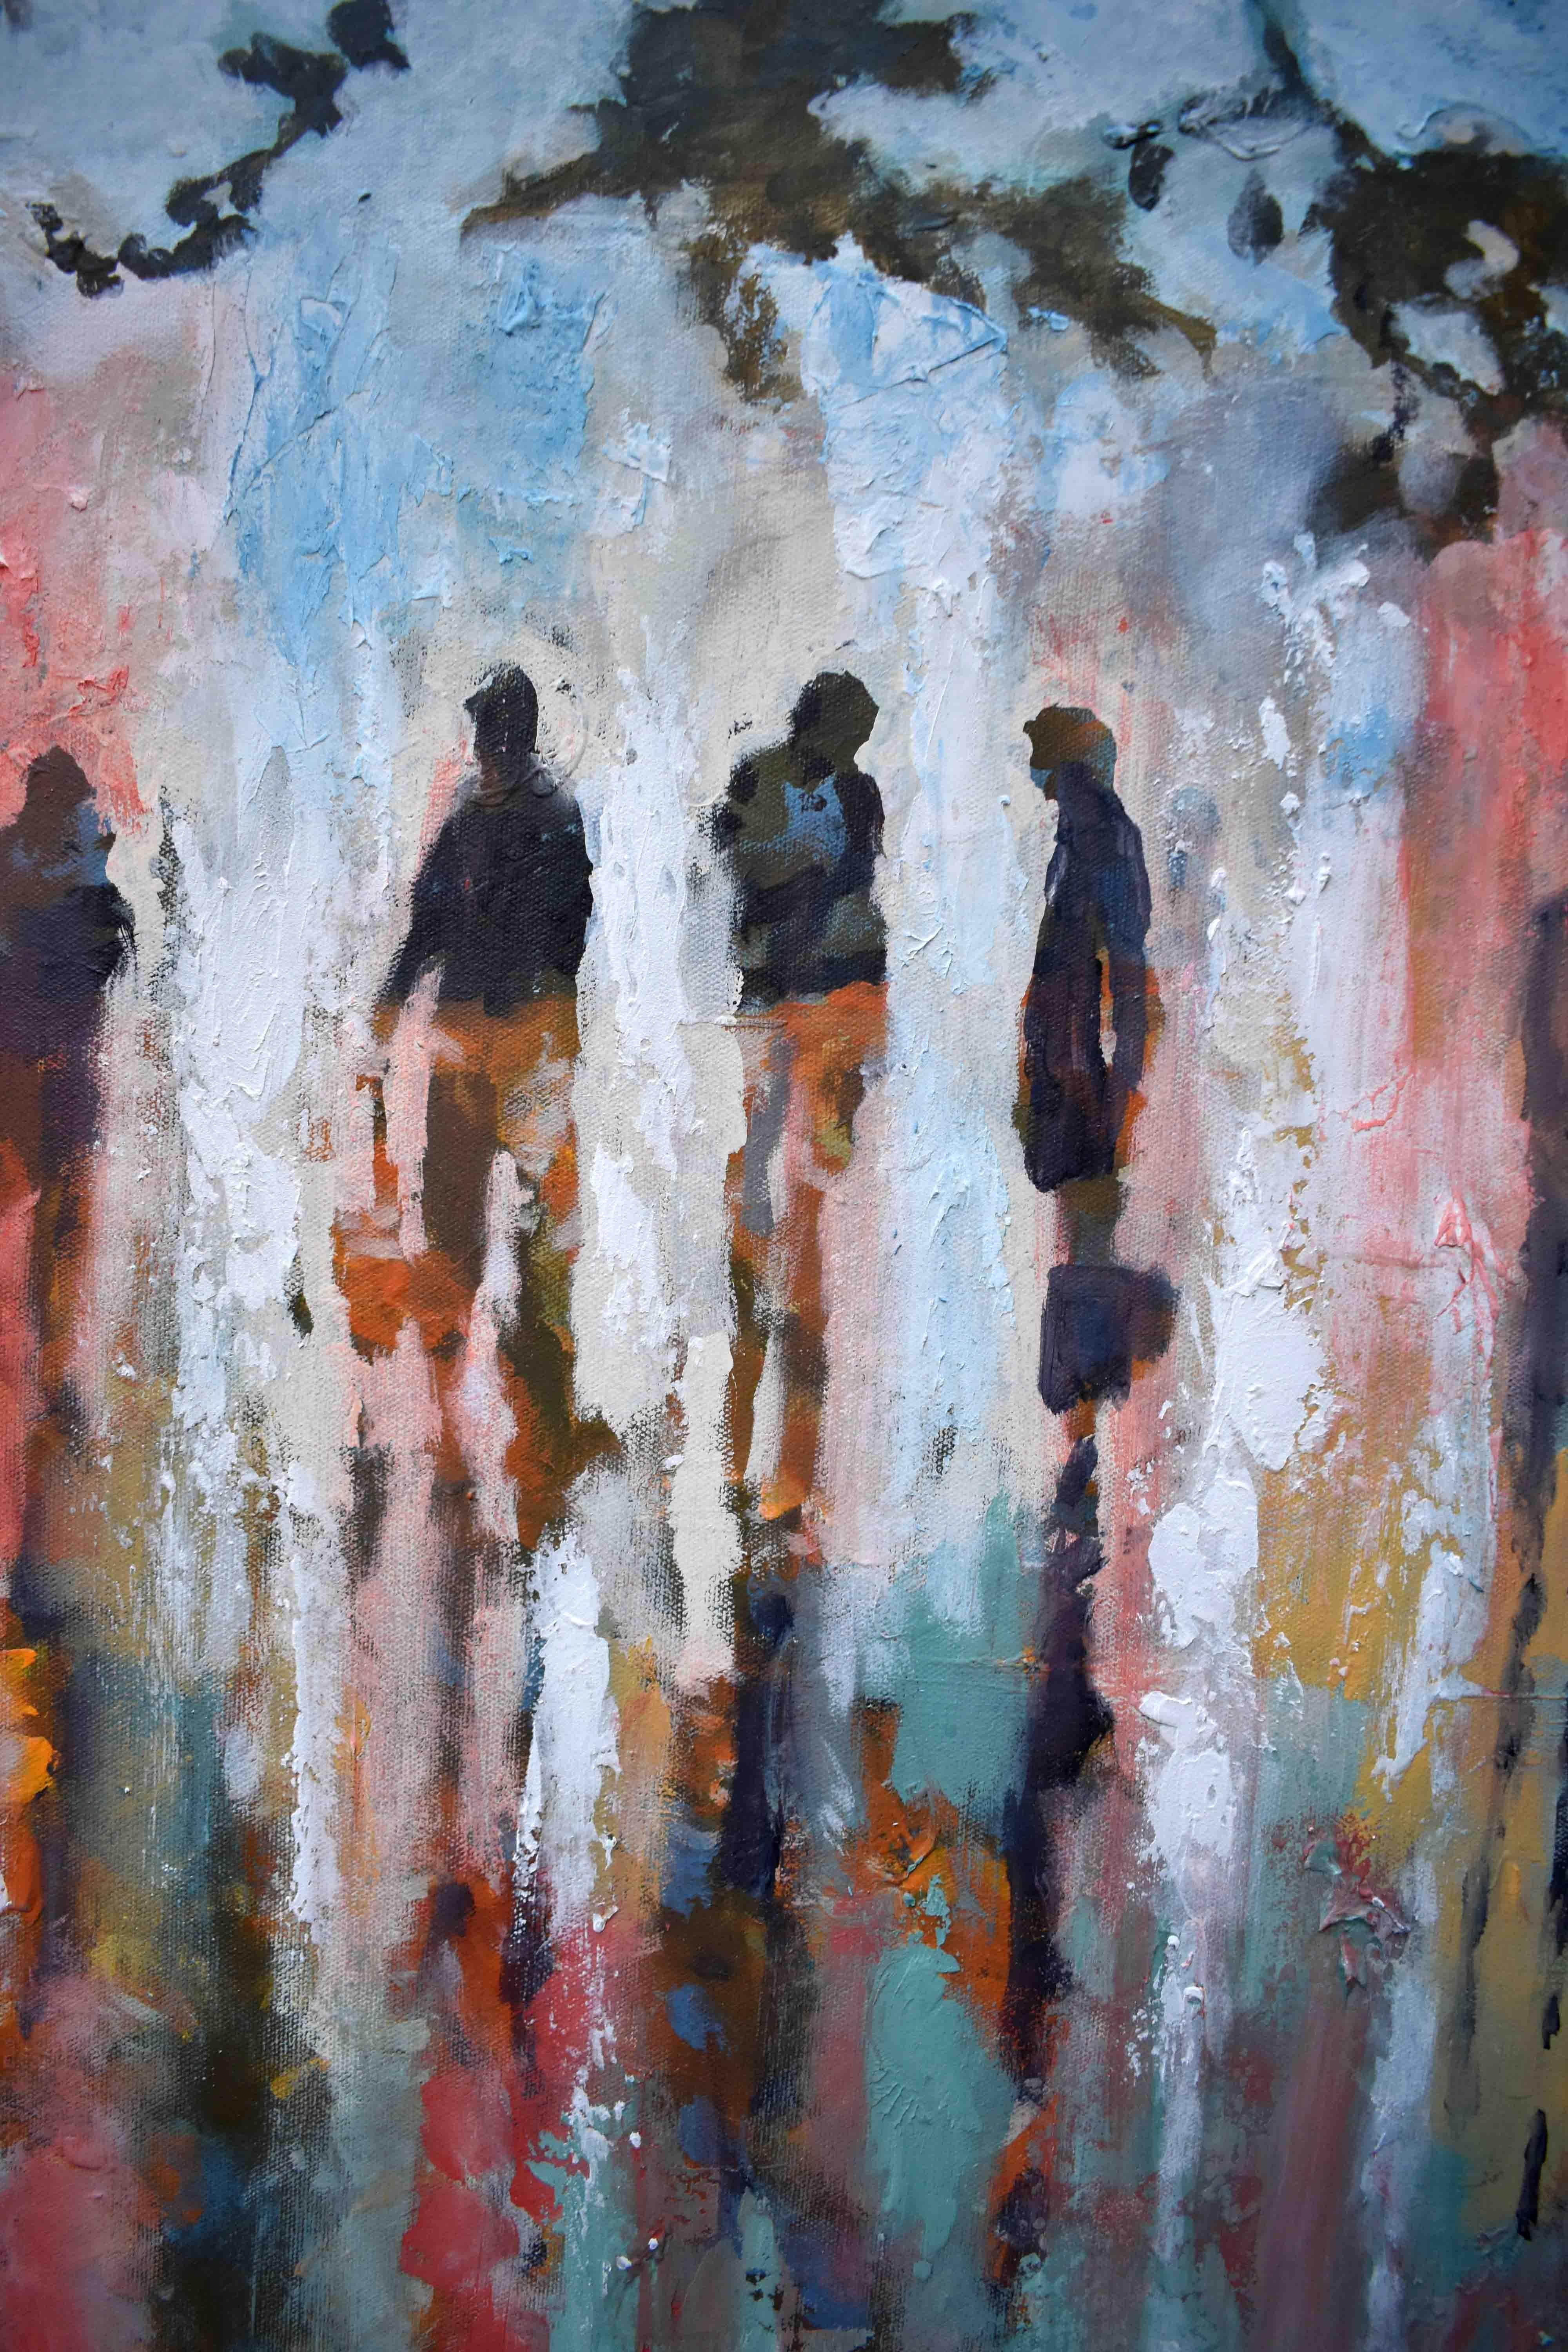 Meeting Is Over - Gray Figurative Painting by Kip Decker